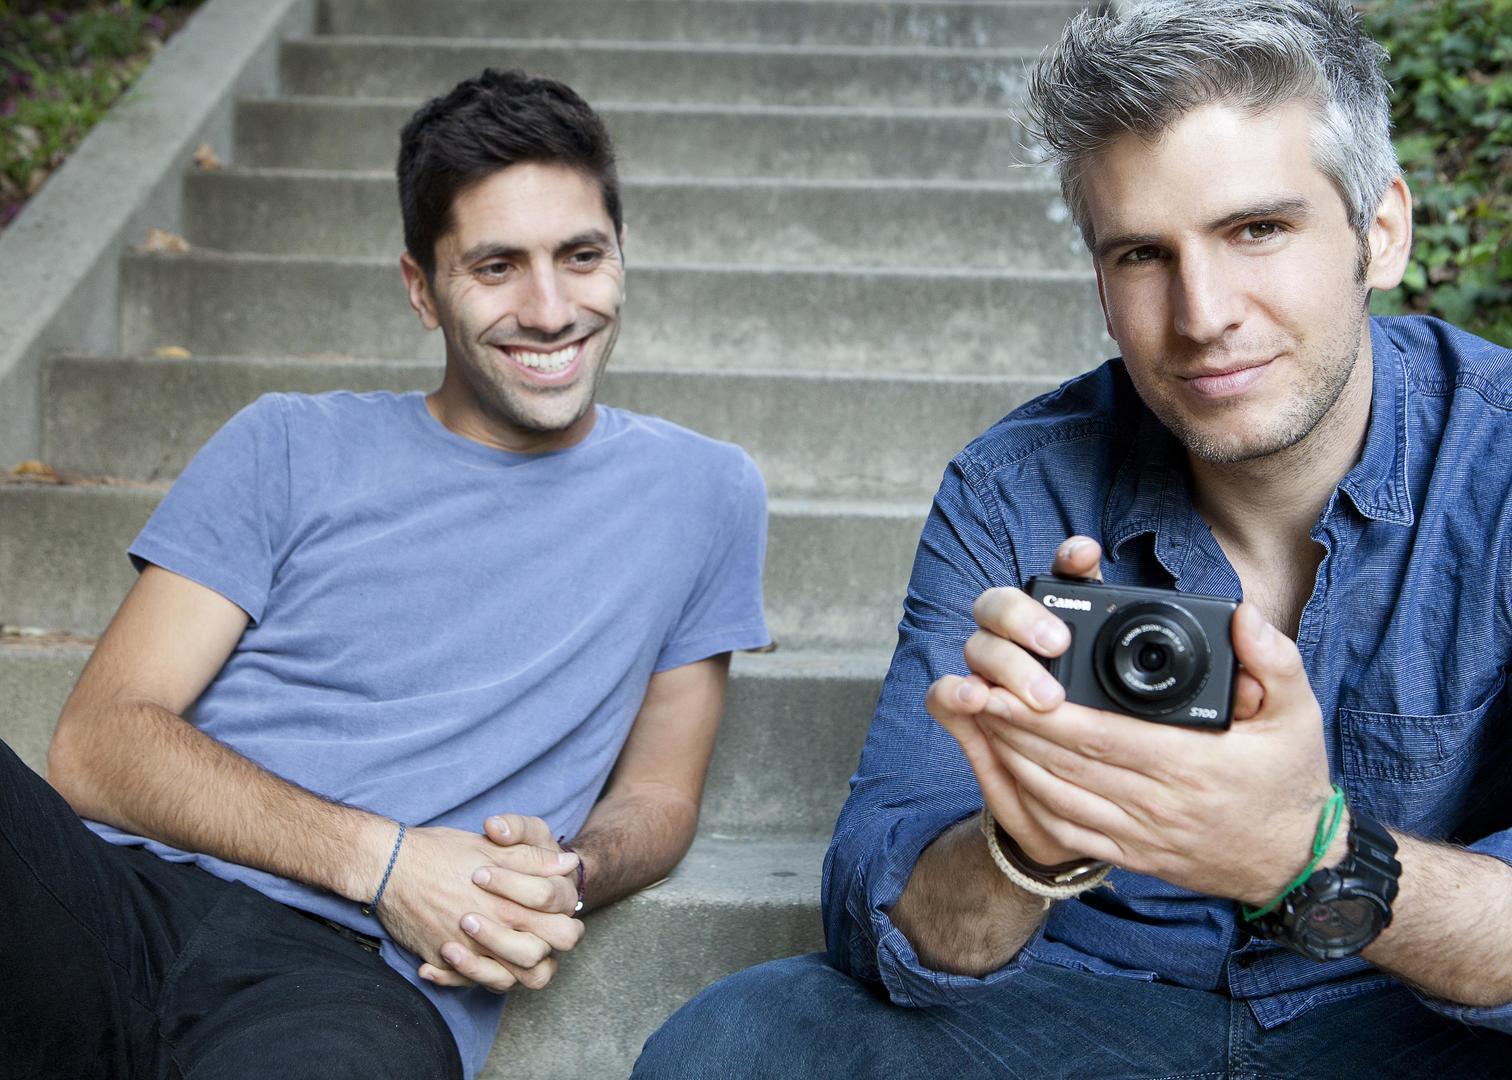 catfish nev and max Wallpapers HD Wallpapers.